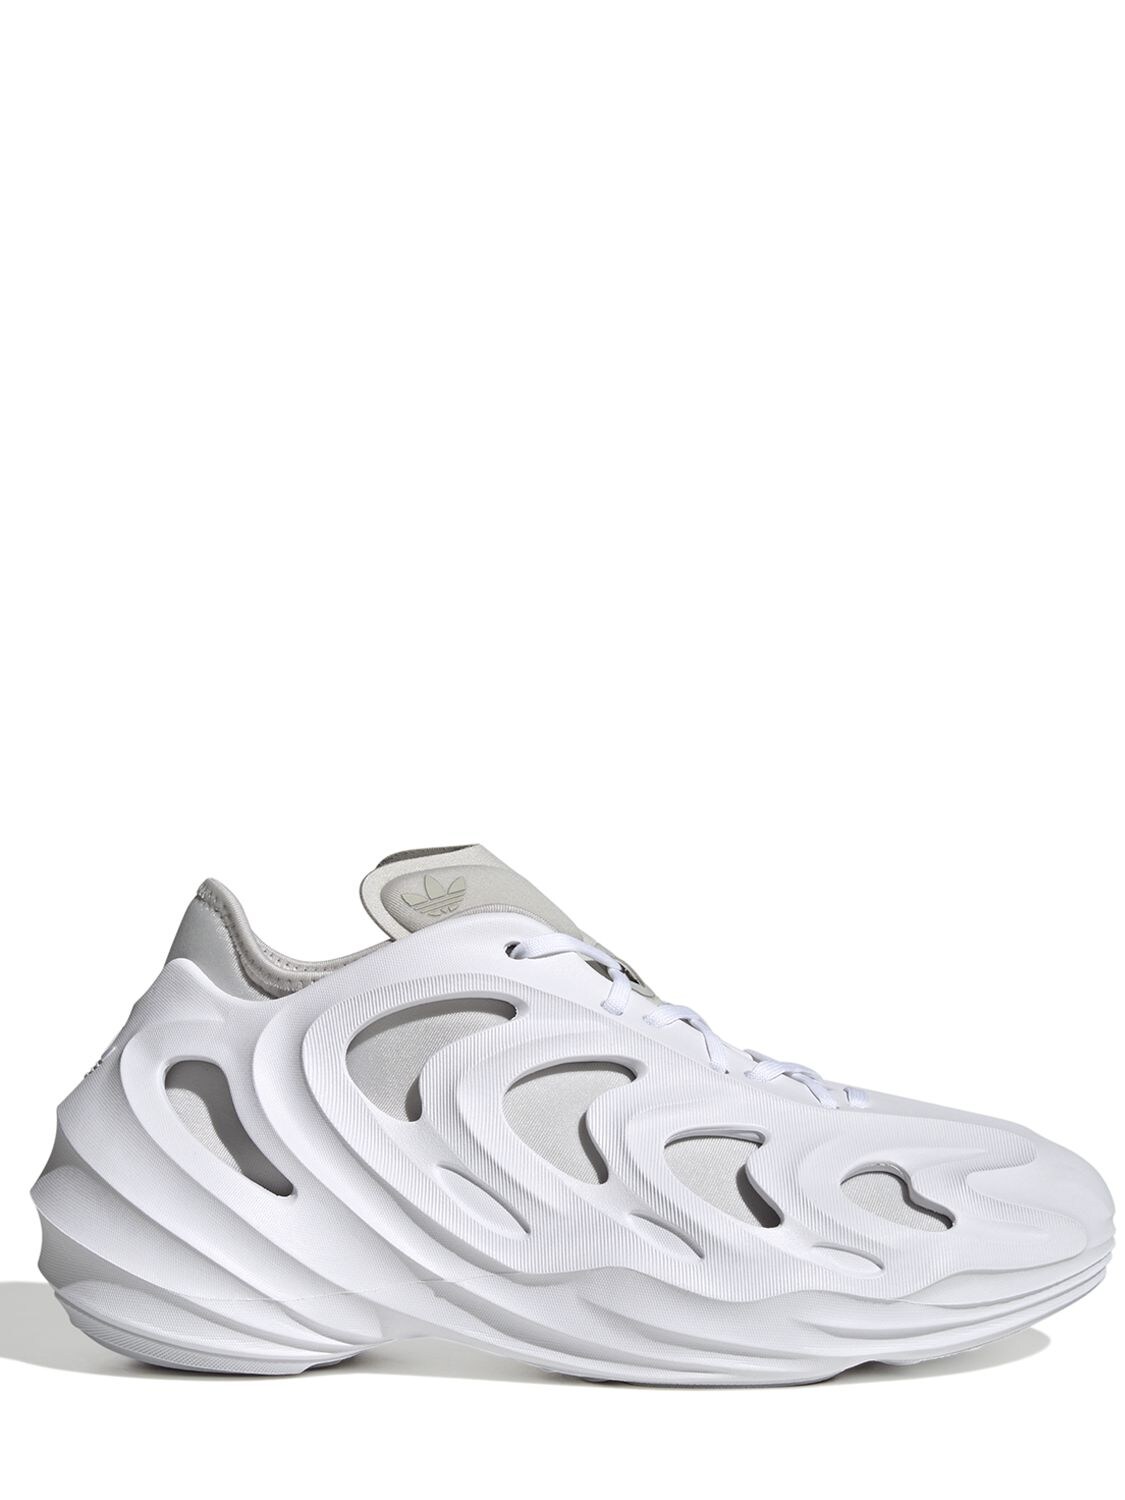 Image of Adifom Q Sneakers